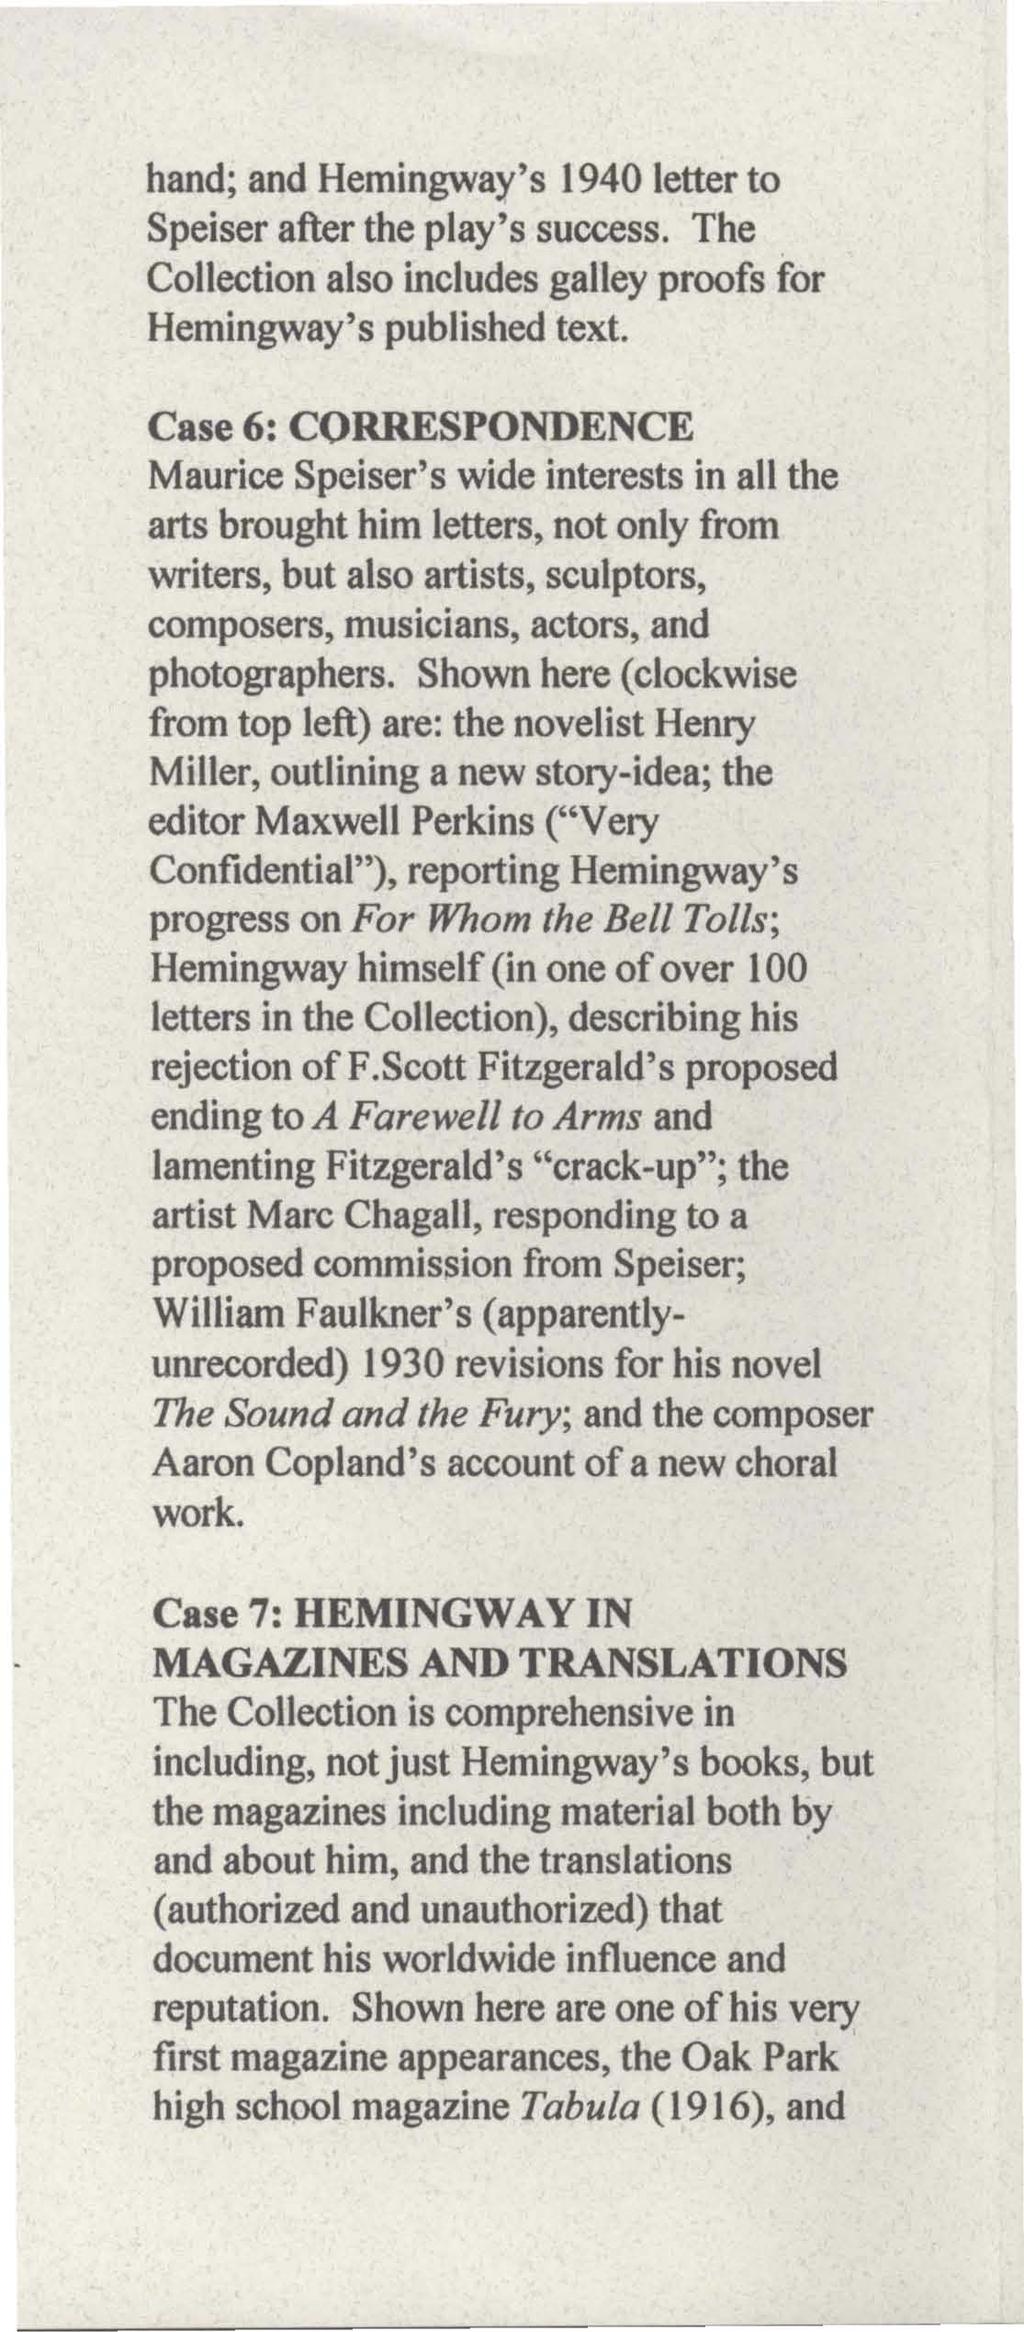 hand; and Hemingway's 1940 letter to Speiser after the play's success. The Collection also includes galley proofs for Hemingway's published text.